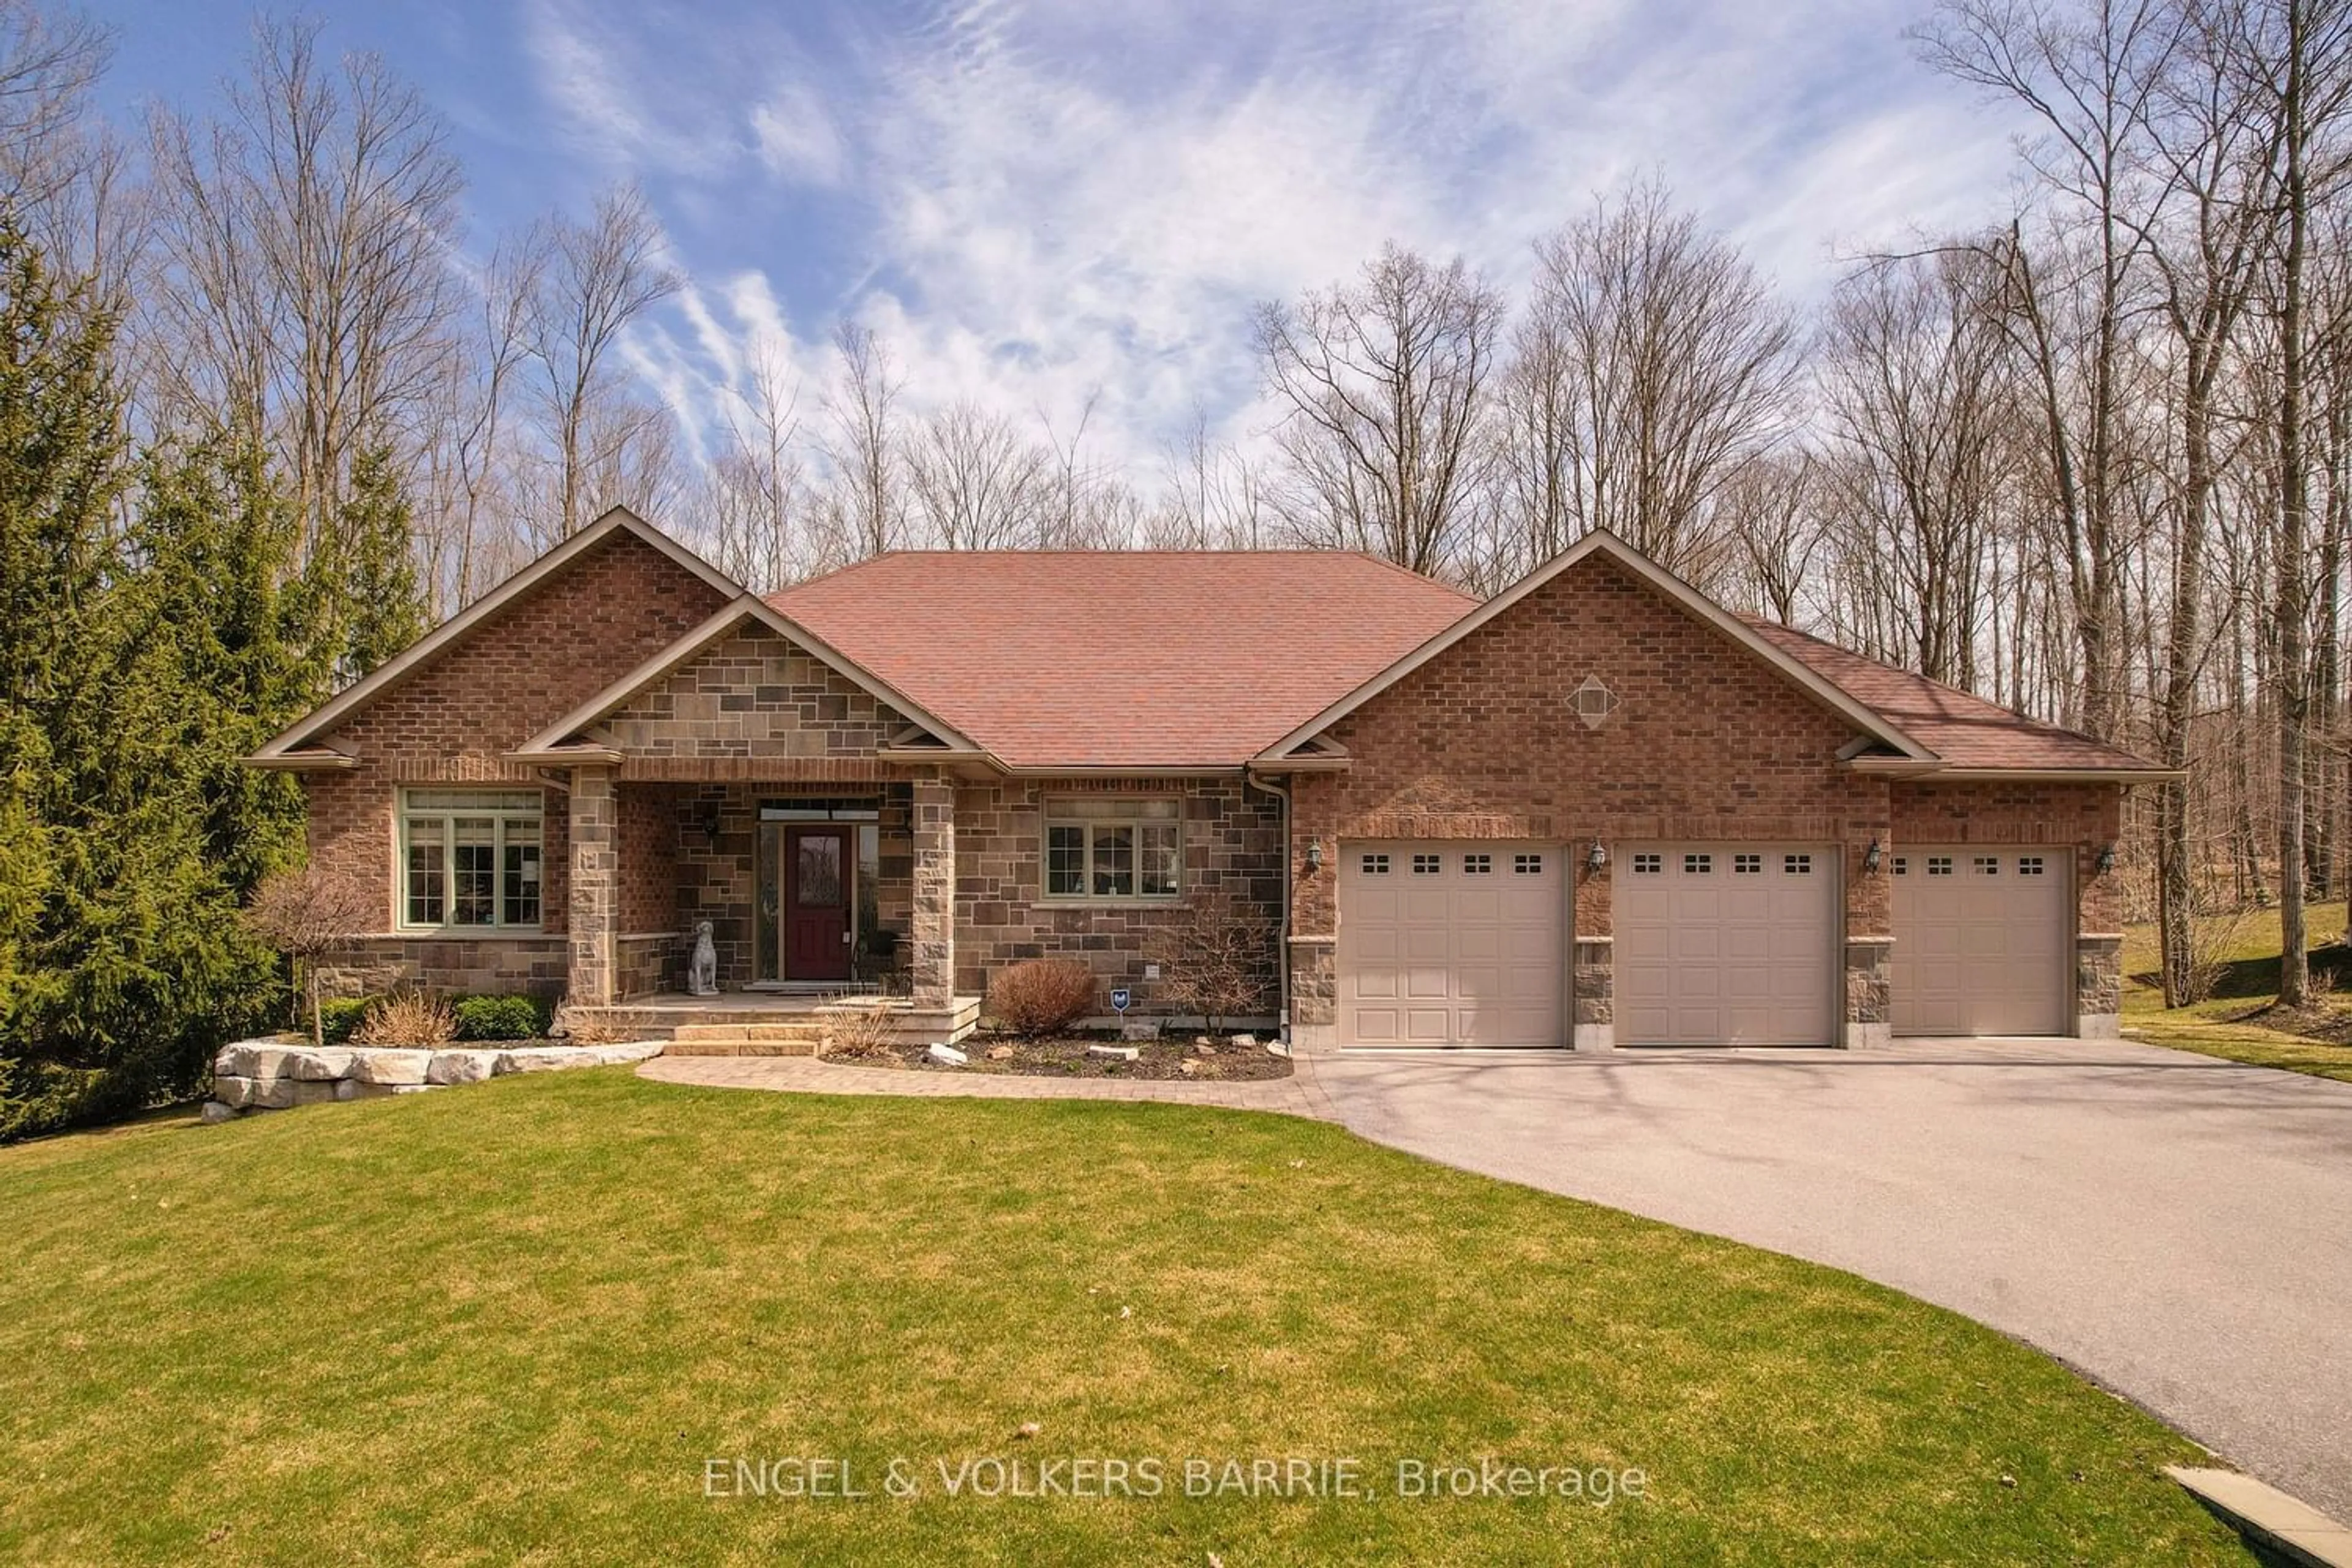 Home with brick exterior material for 64 Heron Blvd, Springwater Ontario L0L 1Y3